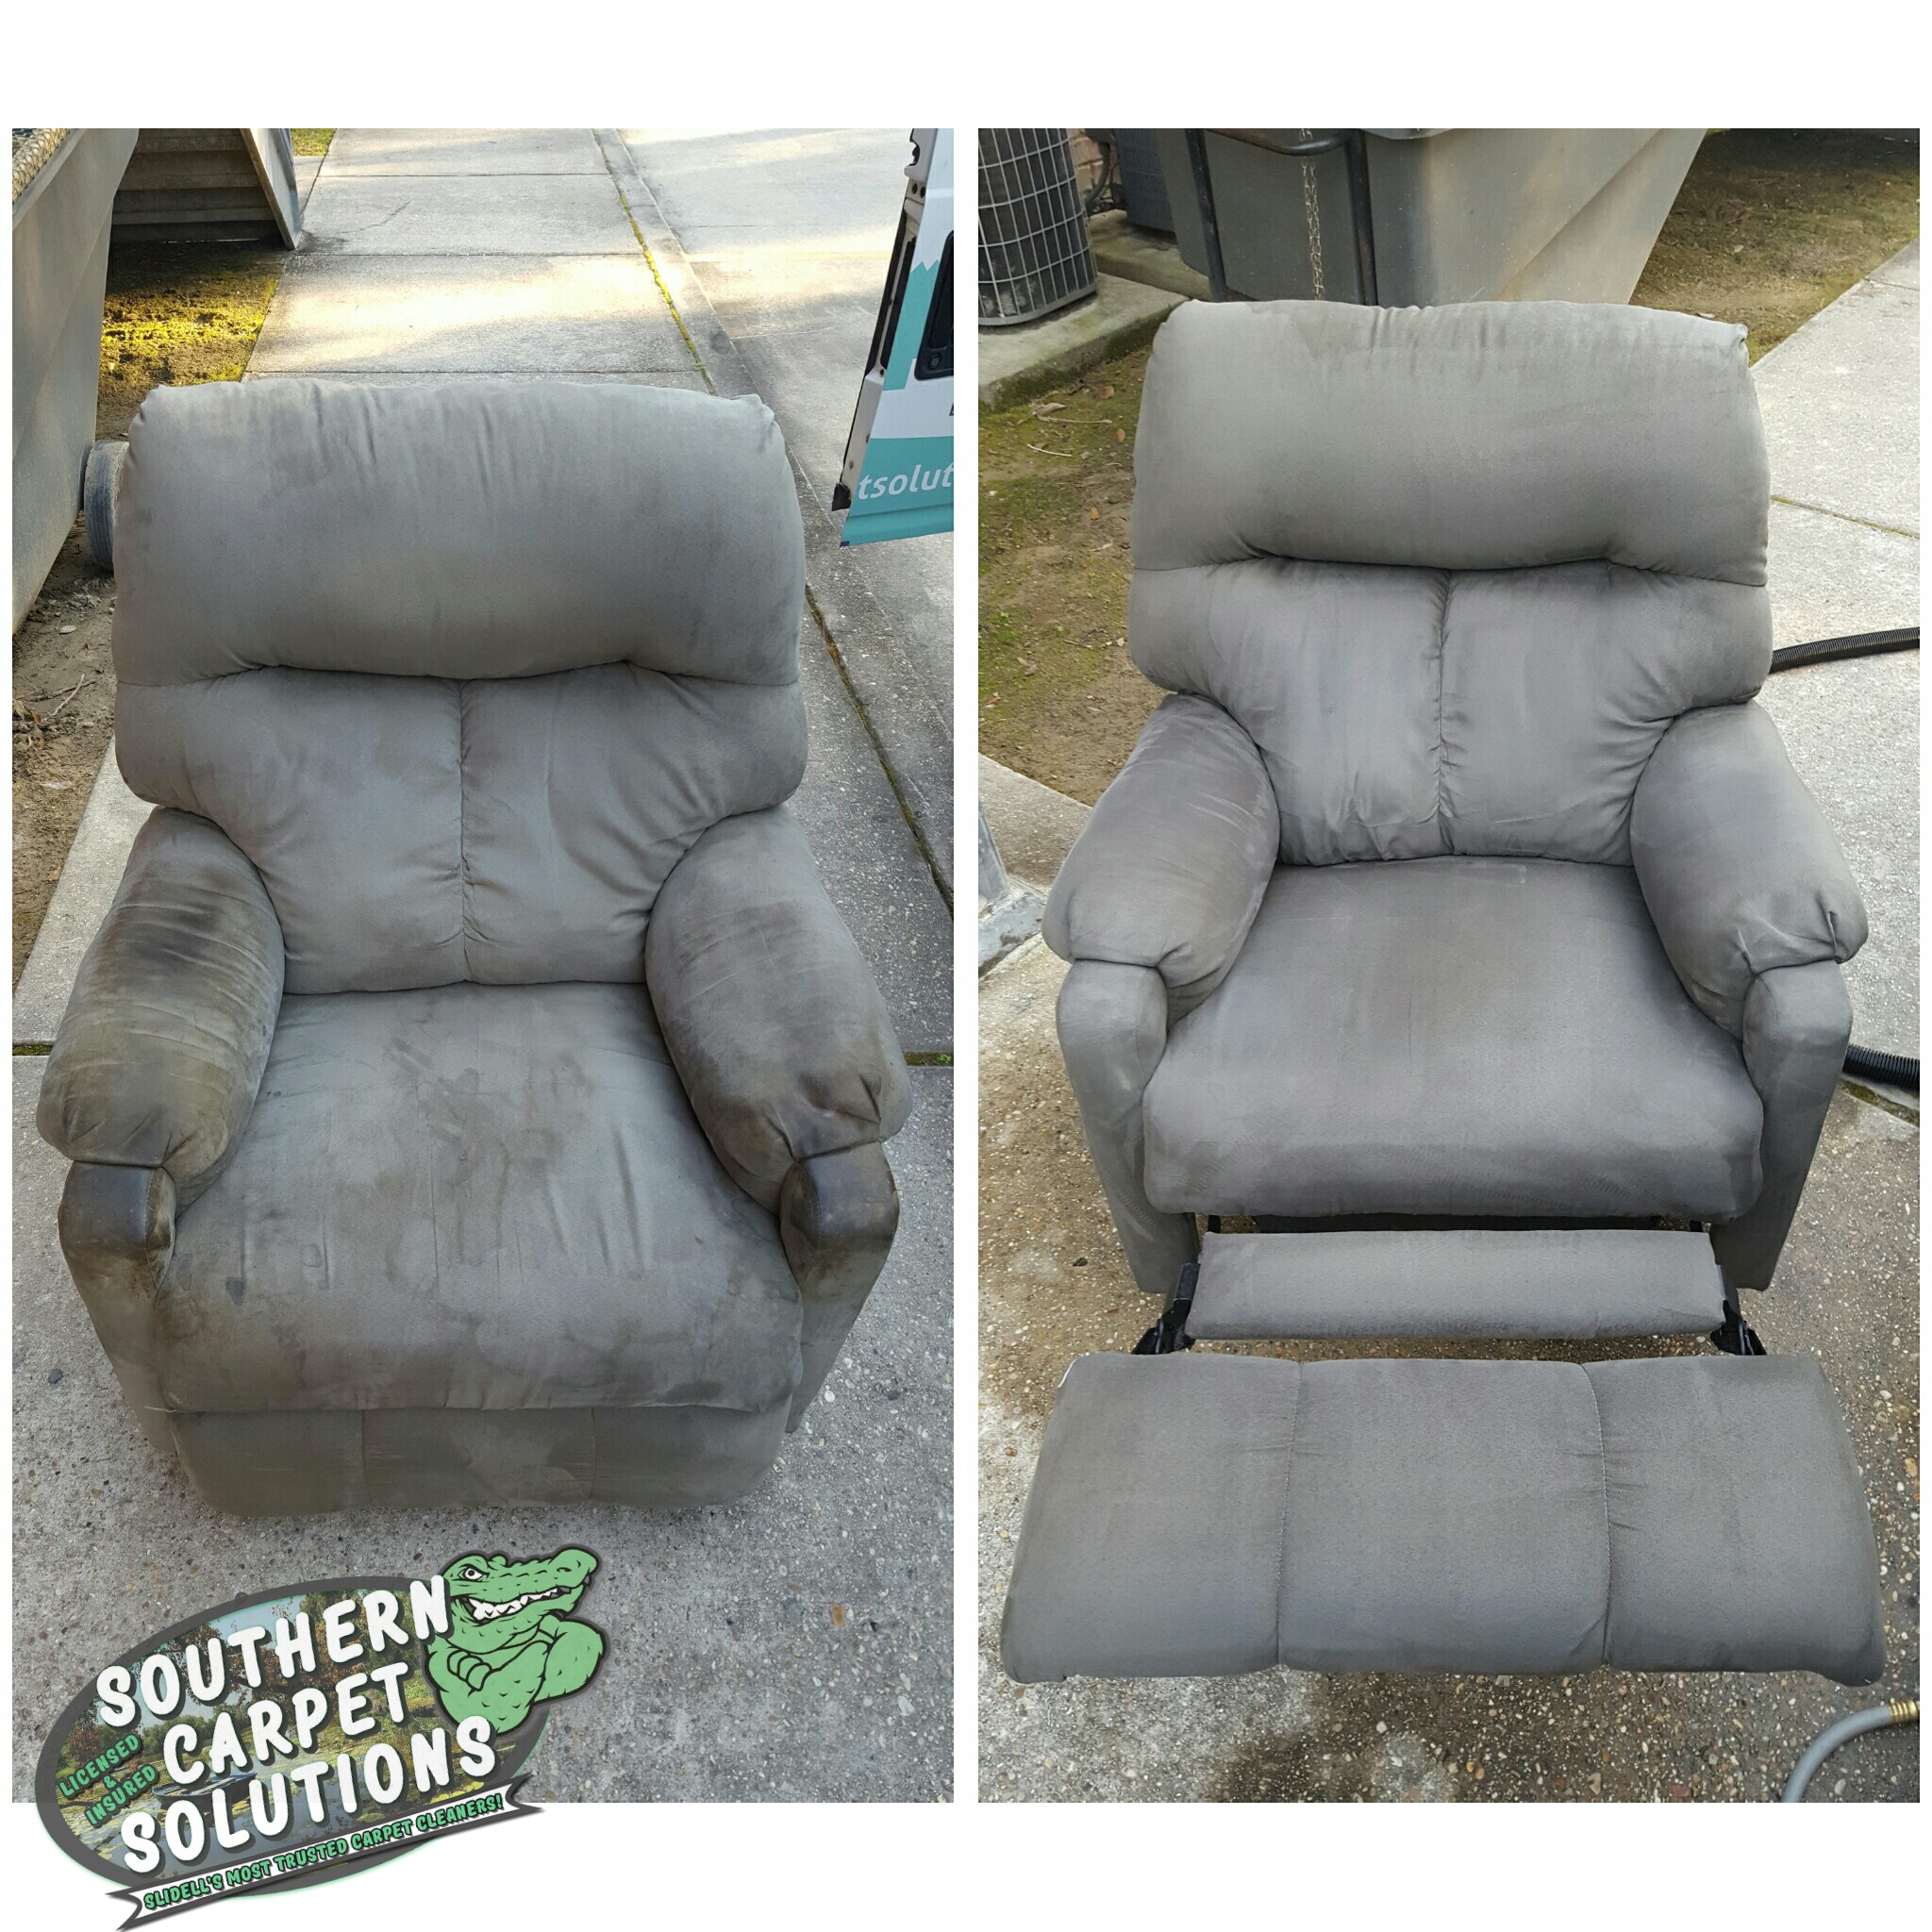 heavy-stain-upholstery-cleaning-southerncarpetsolutions